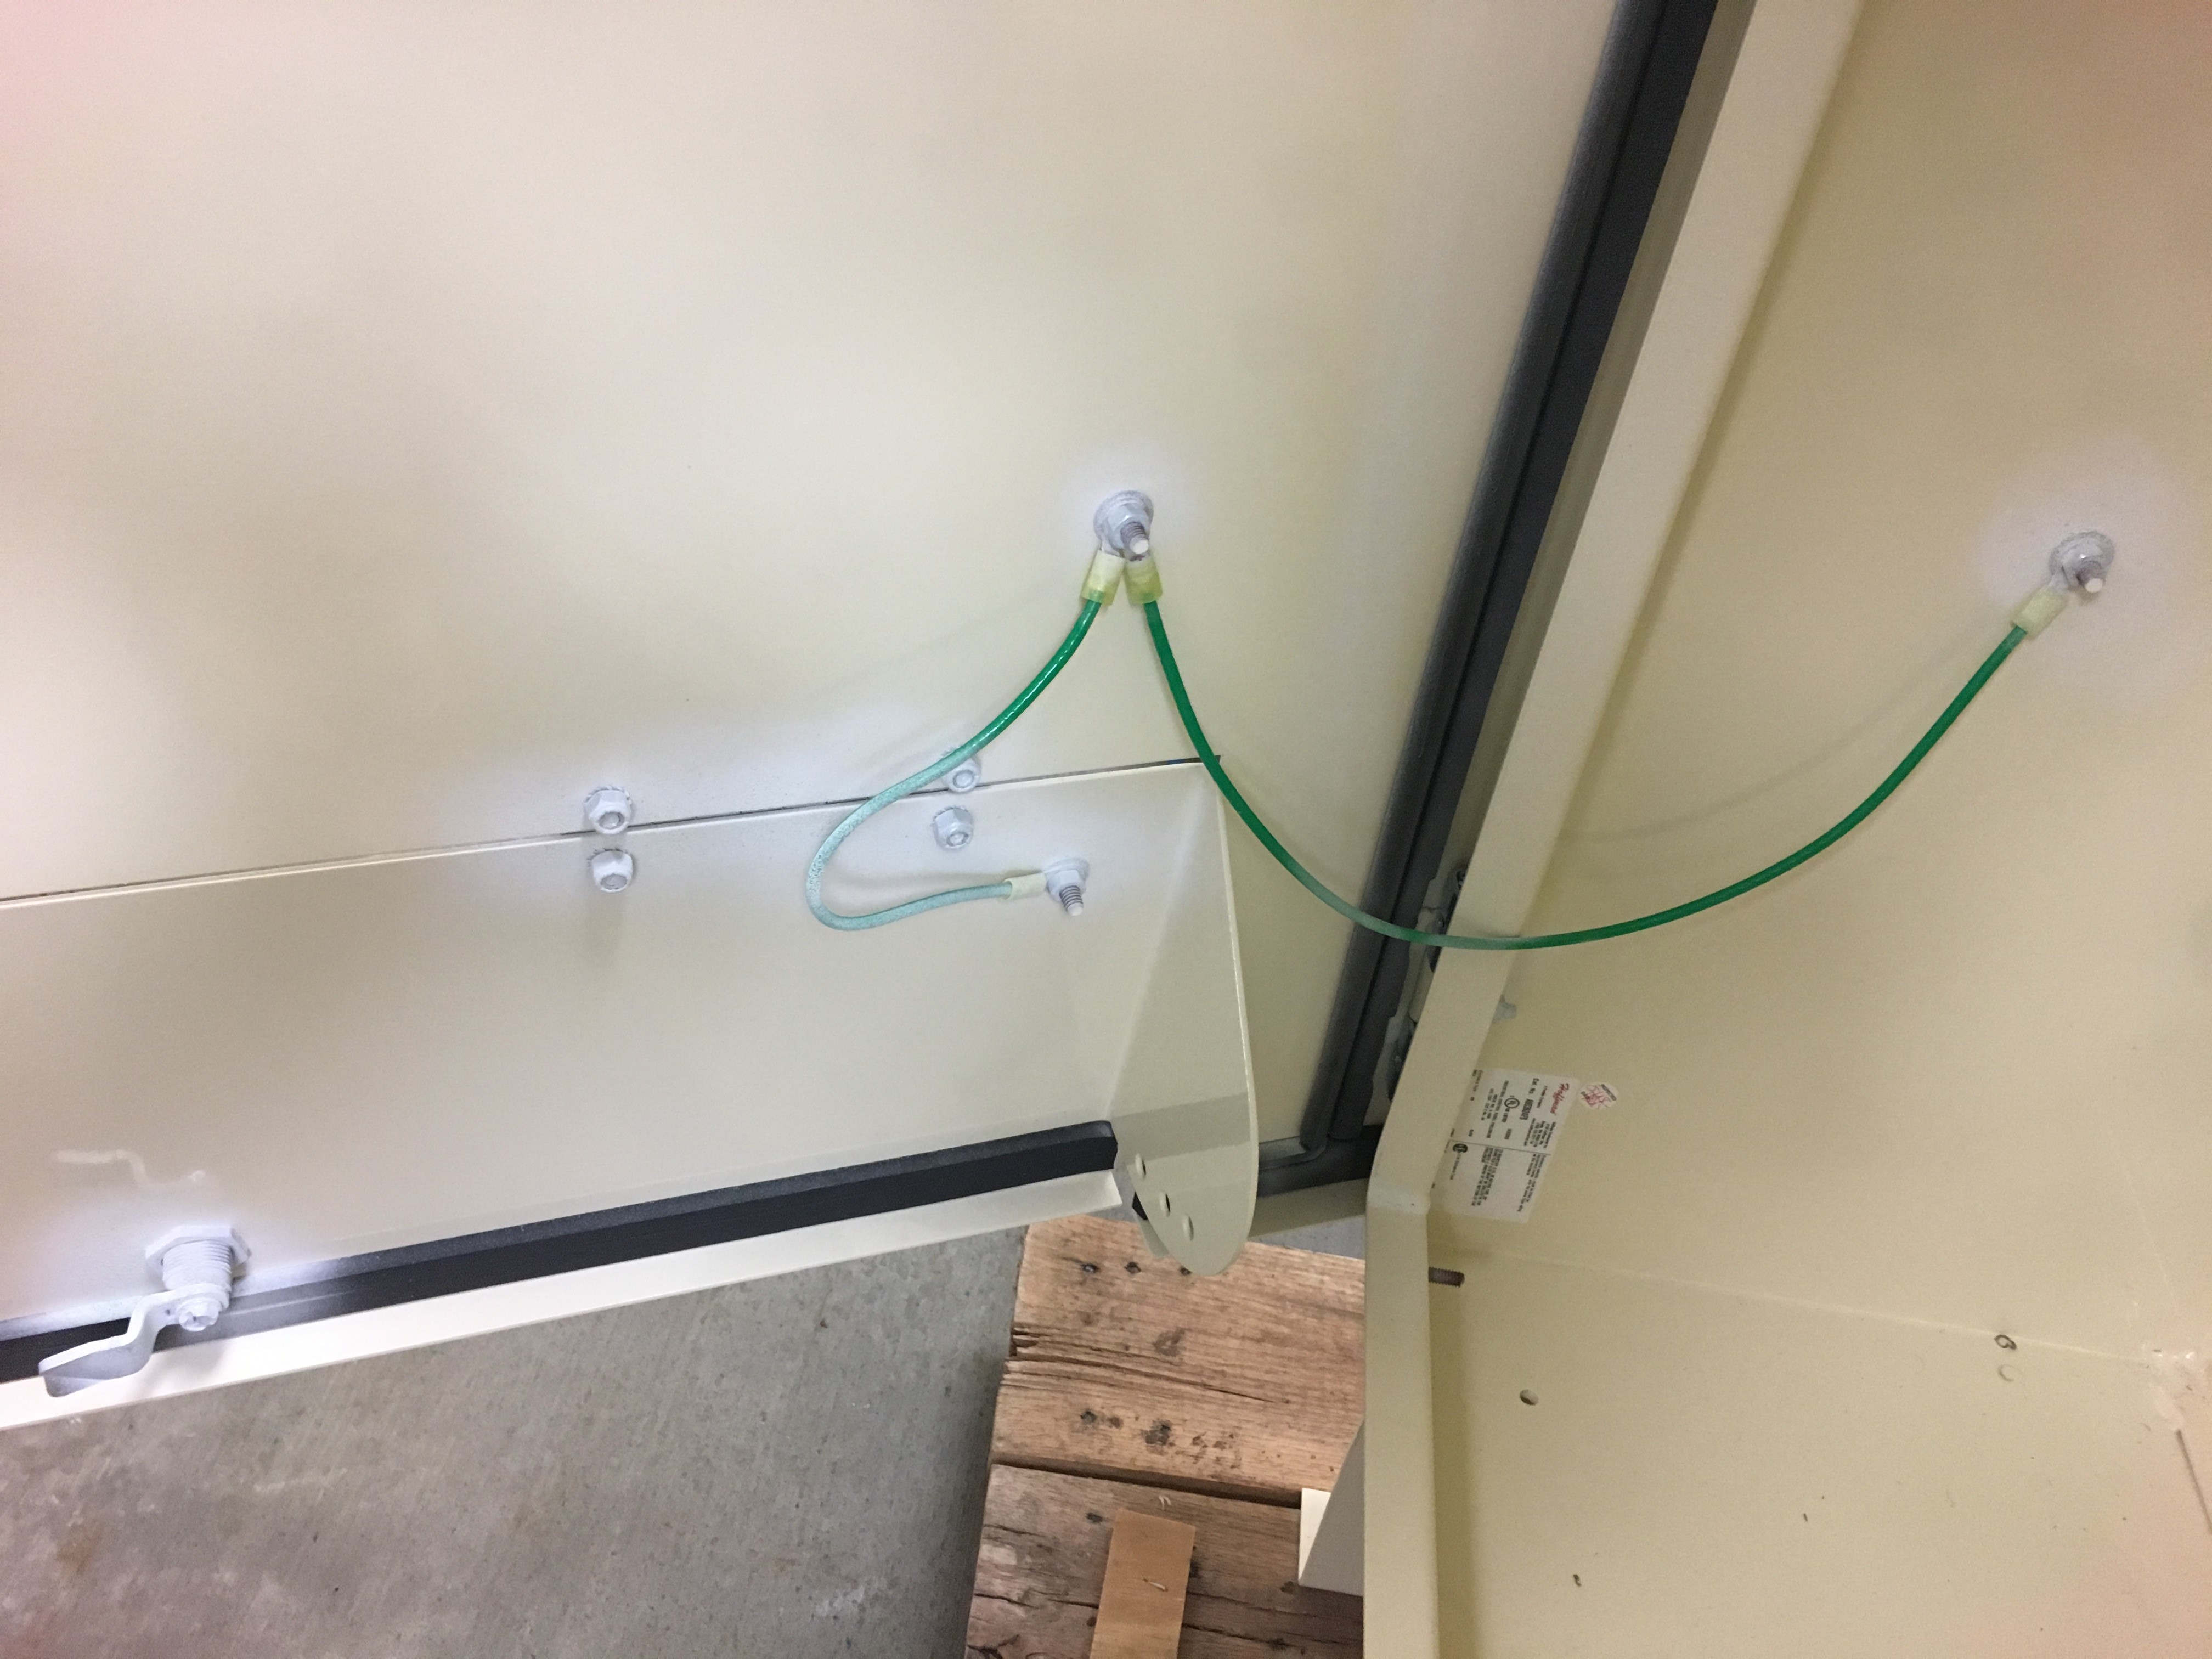 Small Pad Mount Cable Door